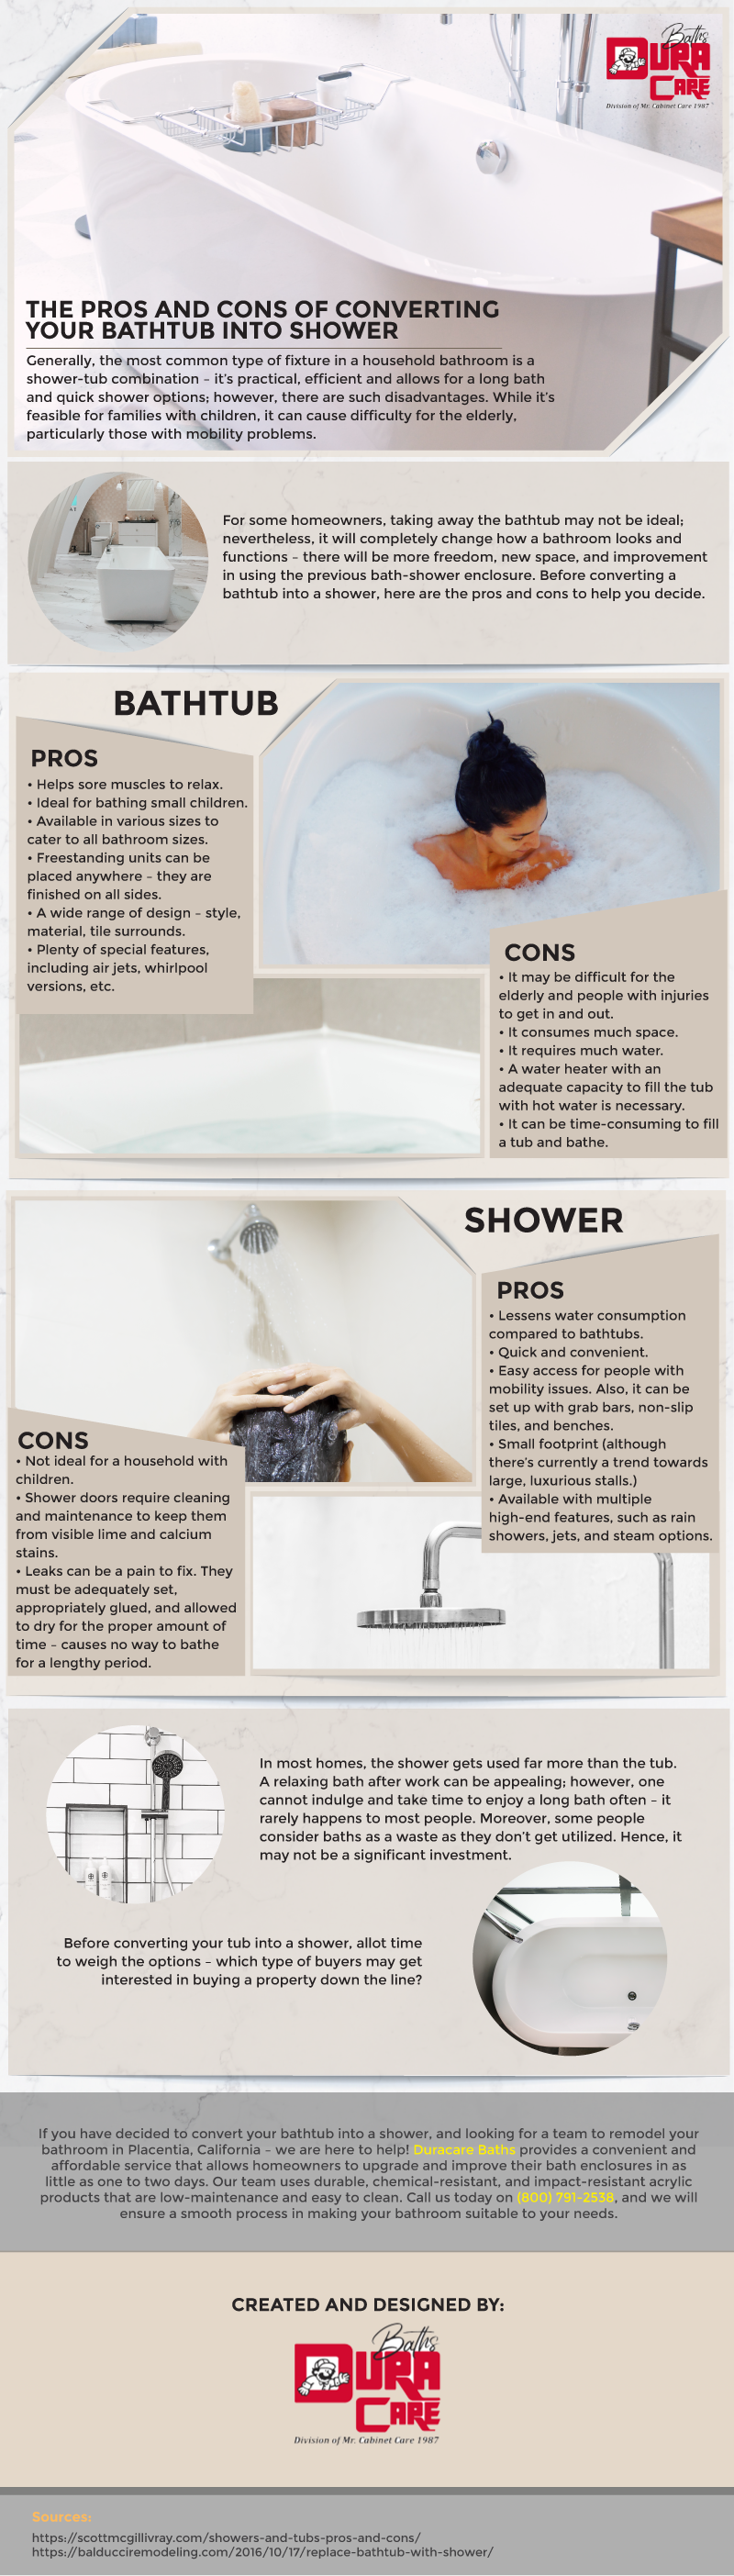 The Pros and Cons of Converting Your Bathtub into Shower-01 infographic